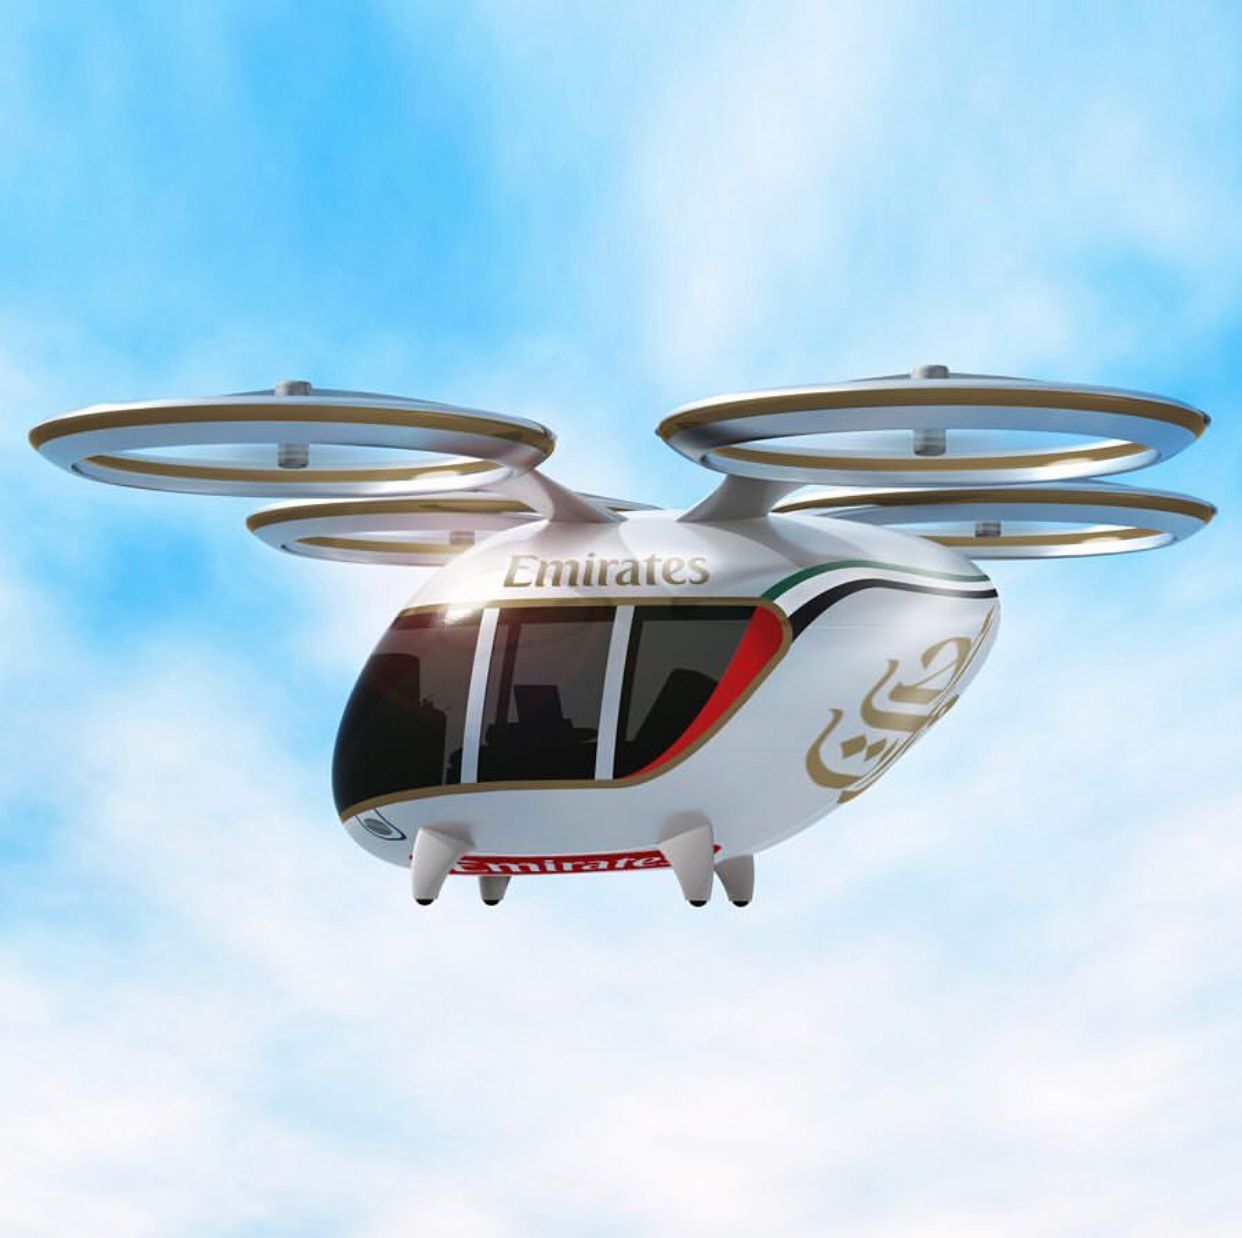 Fly with Emirates in futuristic drone.